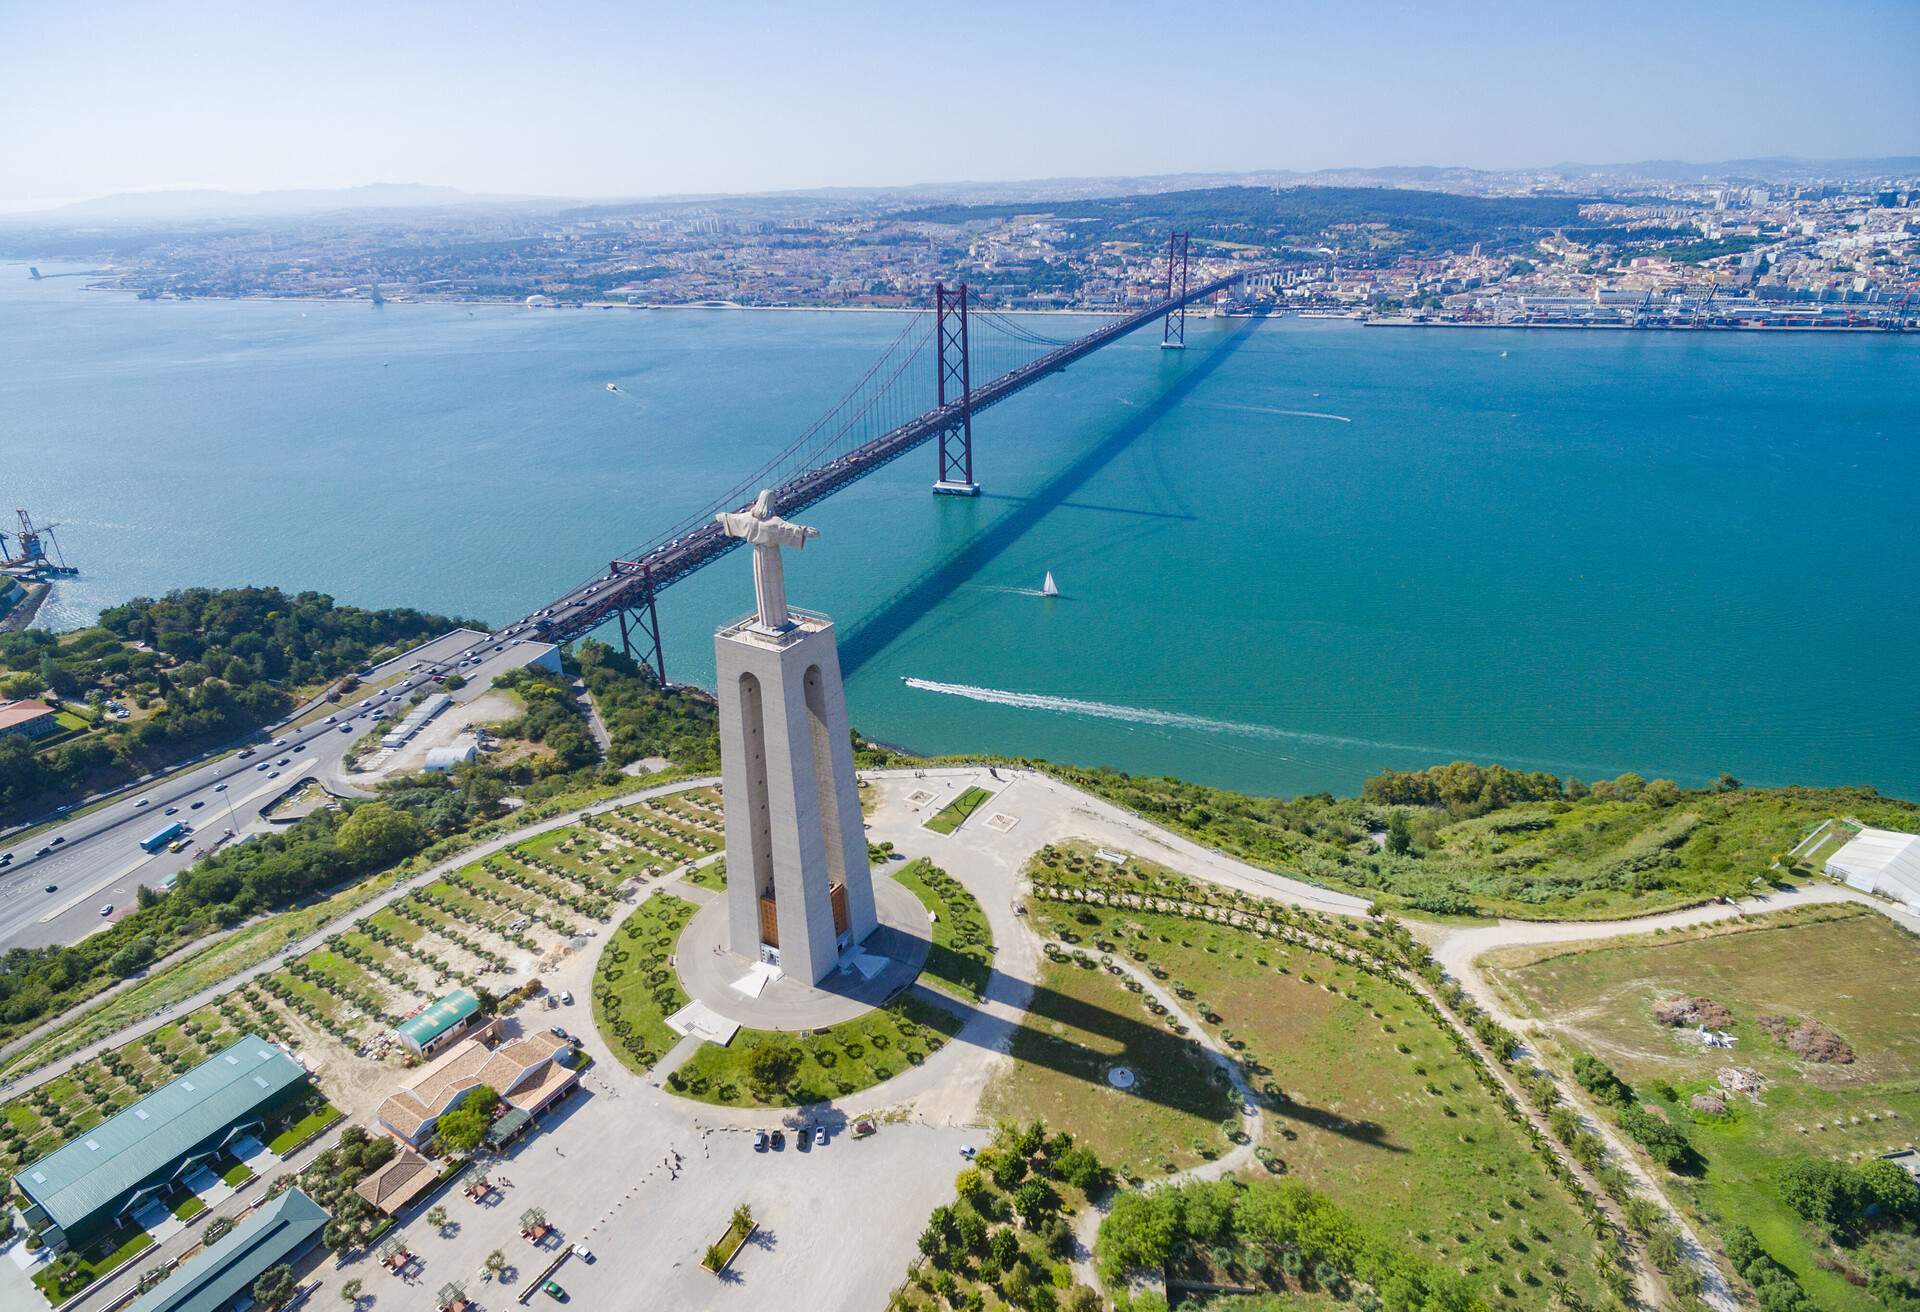 Aerial view of Sanctuary of Christ the King overlooking Lisbon and 25 de Abril Bridge connecting Lisbon and Almada.